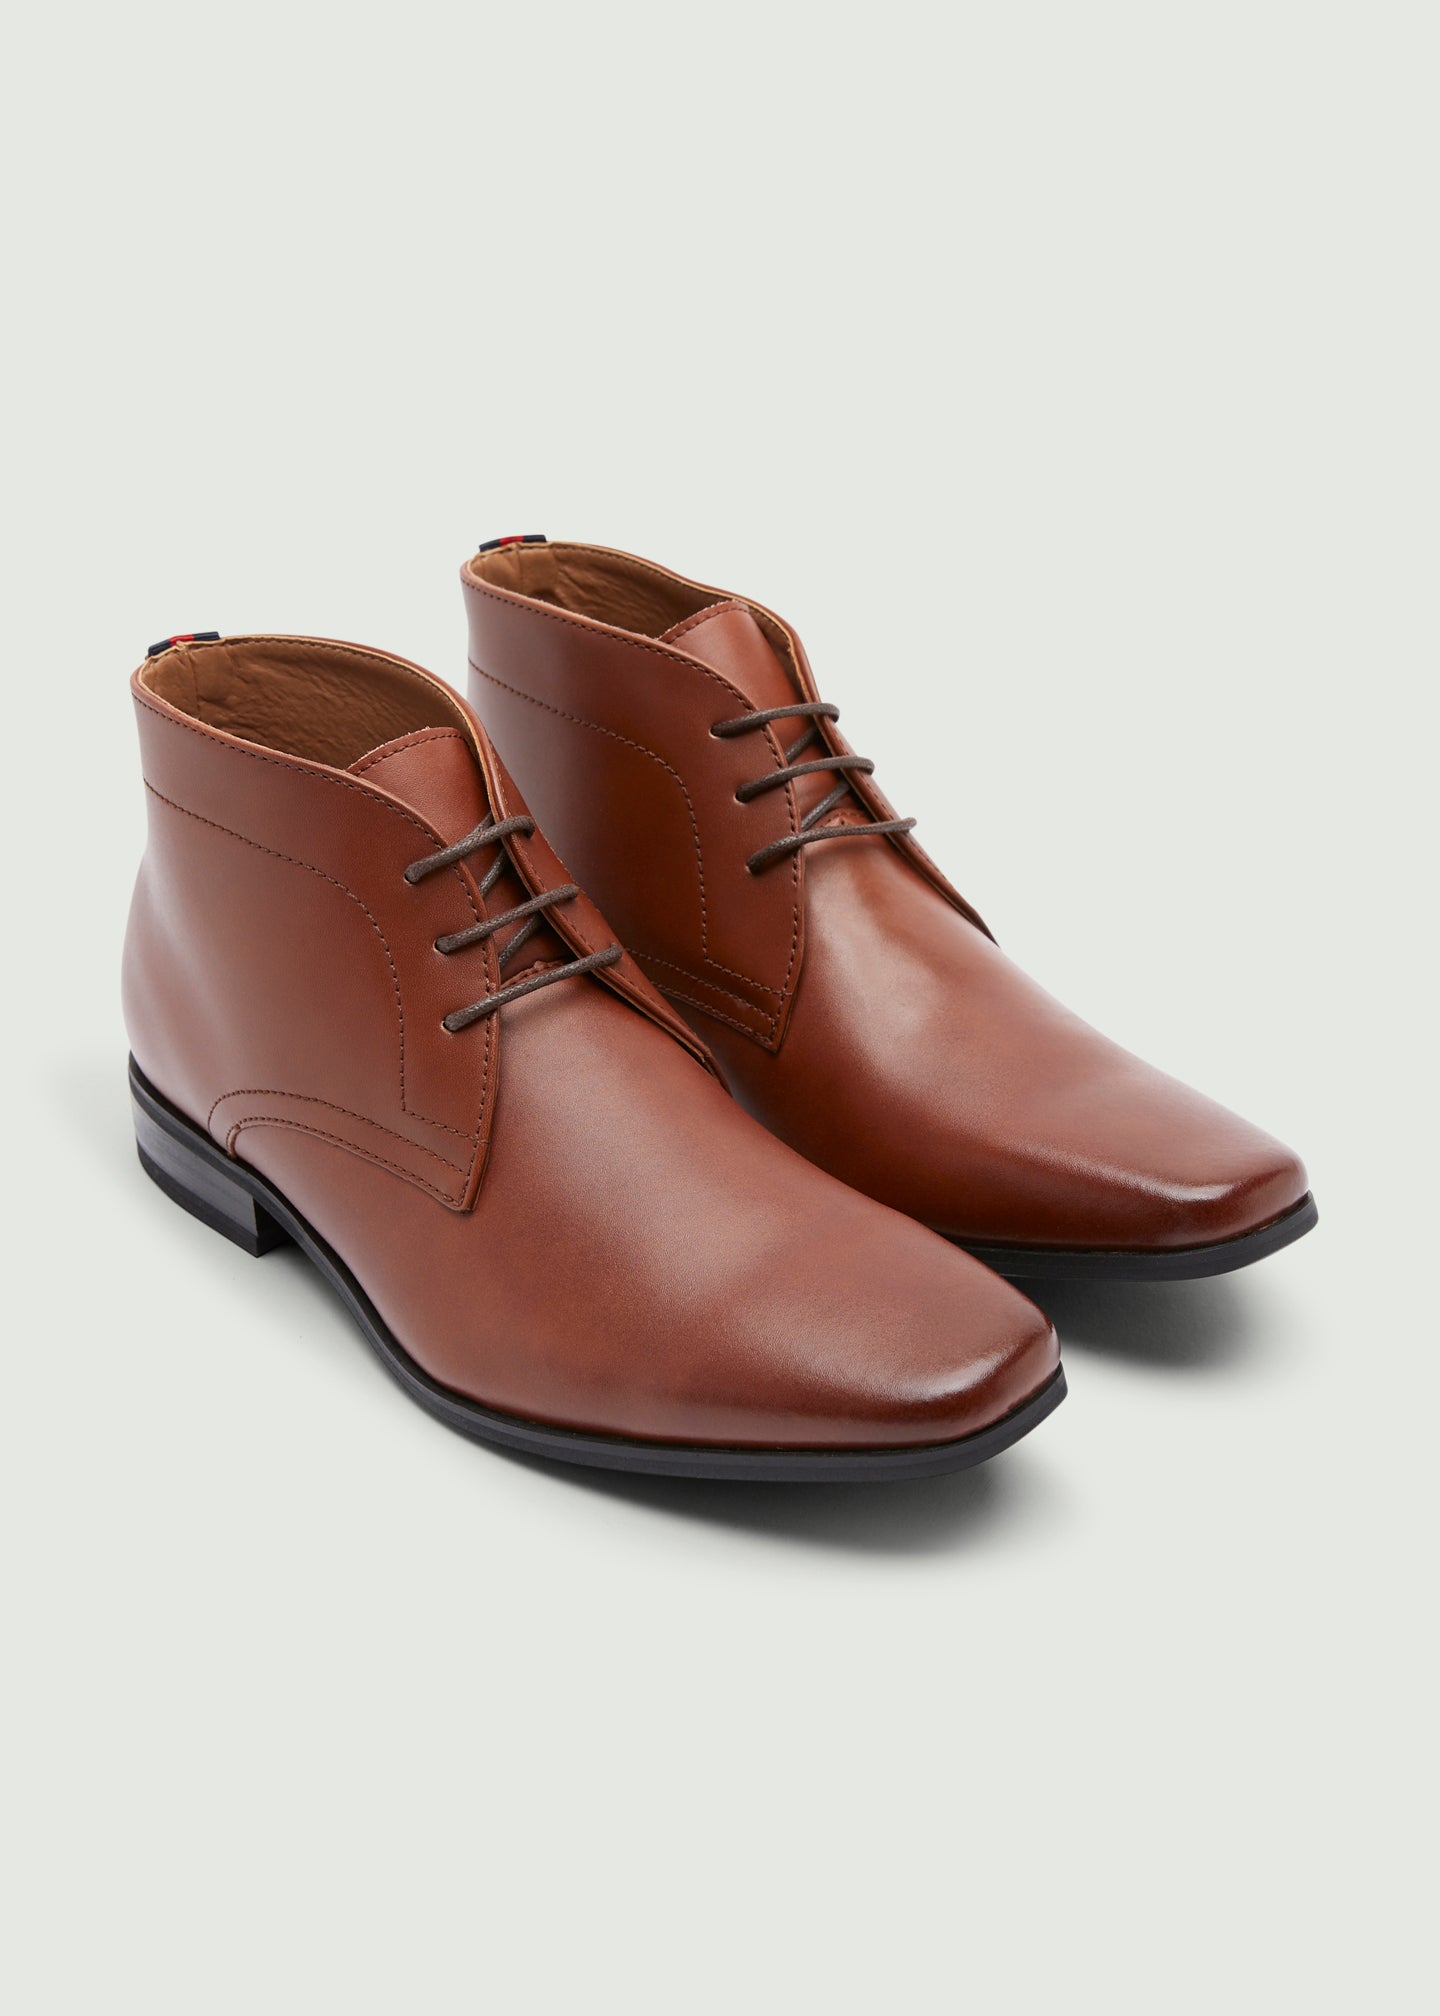 The Best Men's Shoes Ever Created: Official